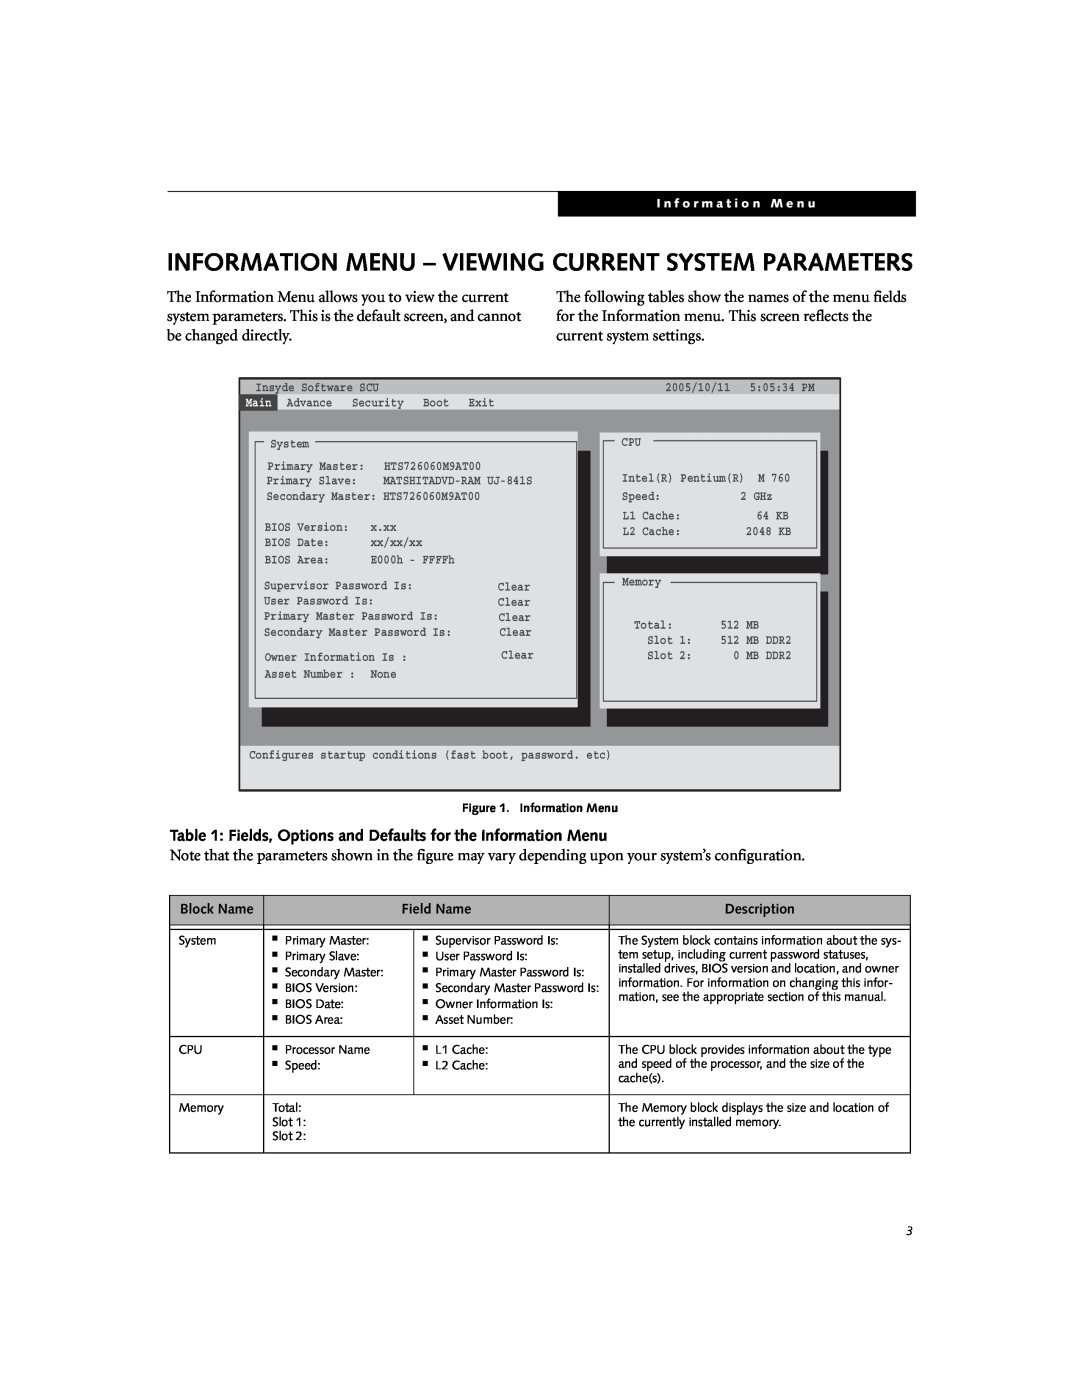 Fujitsu N6220 Fields, Options and Defaults for the Information Menu, Information Menu - Viewing Current System Parameters 